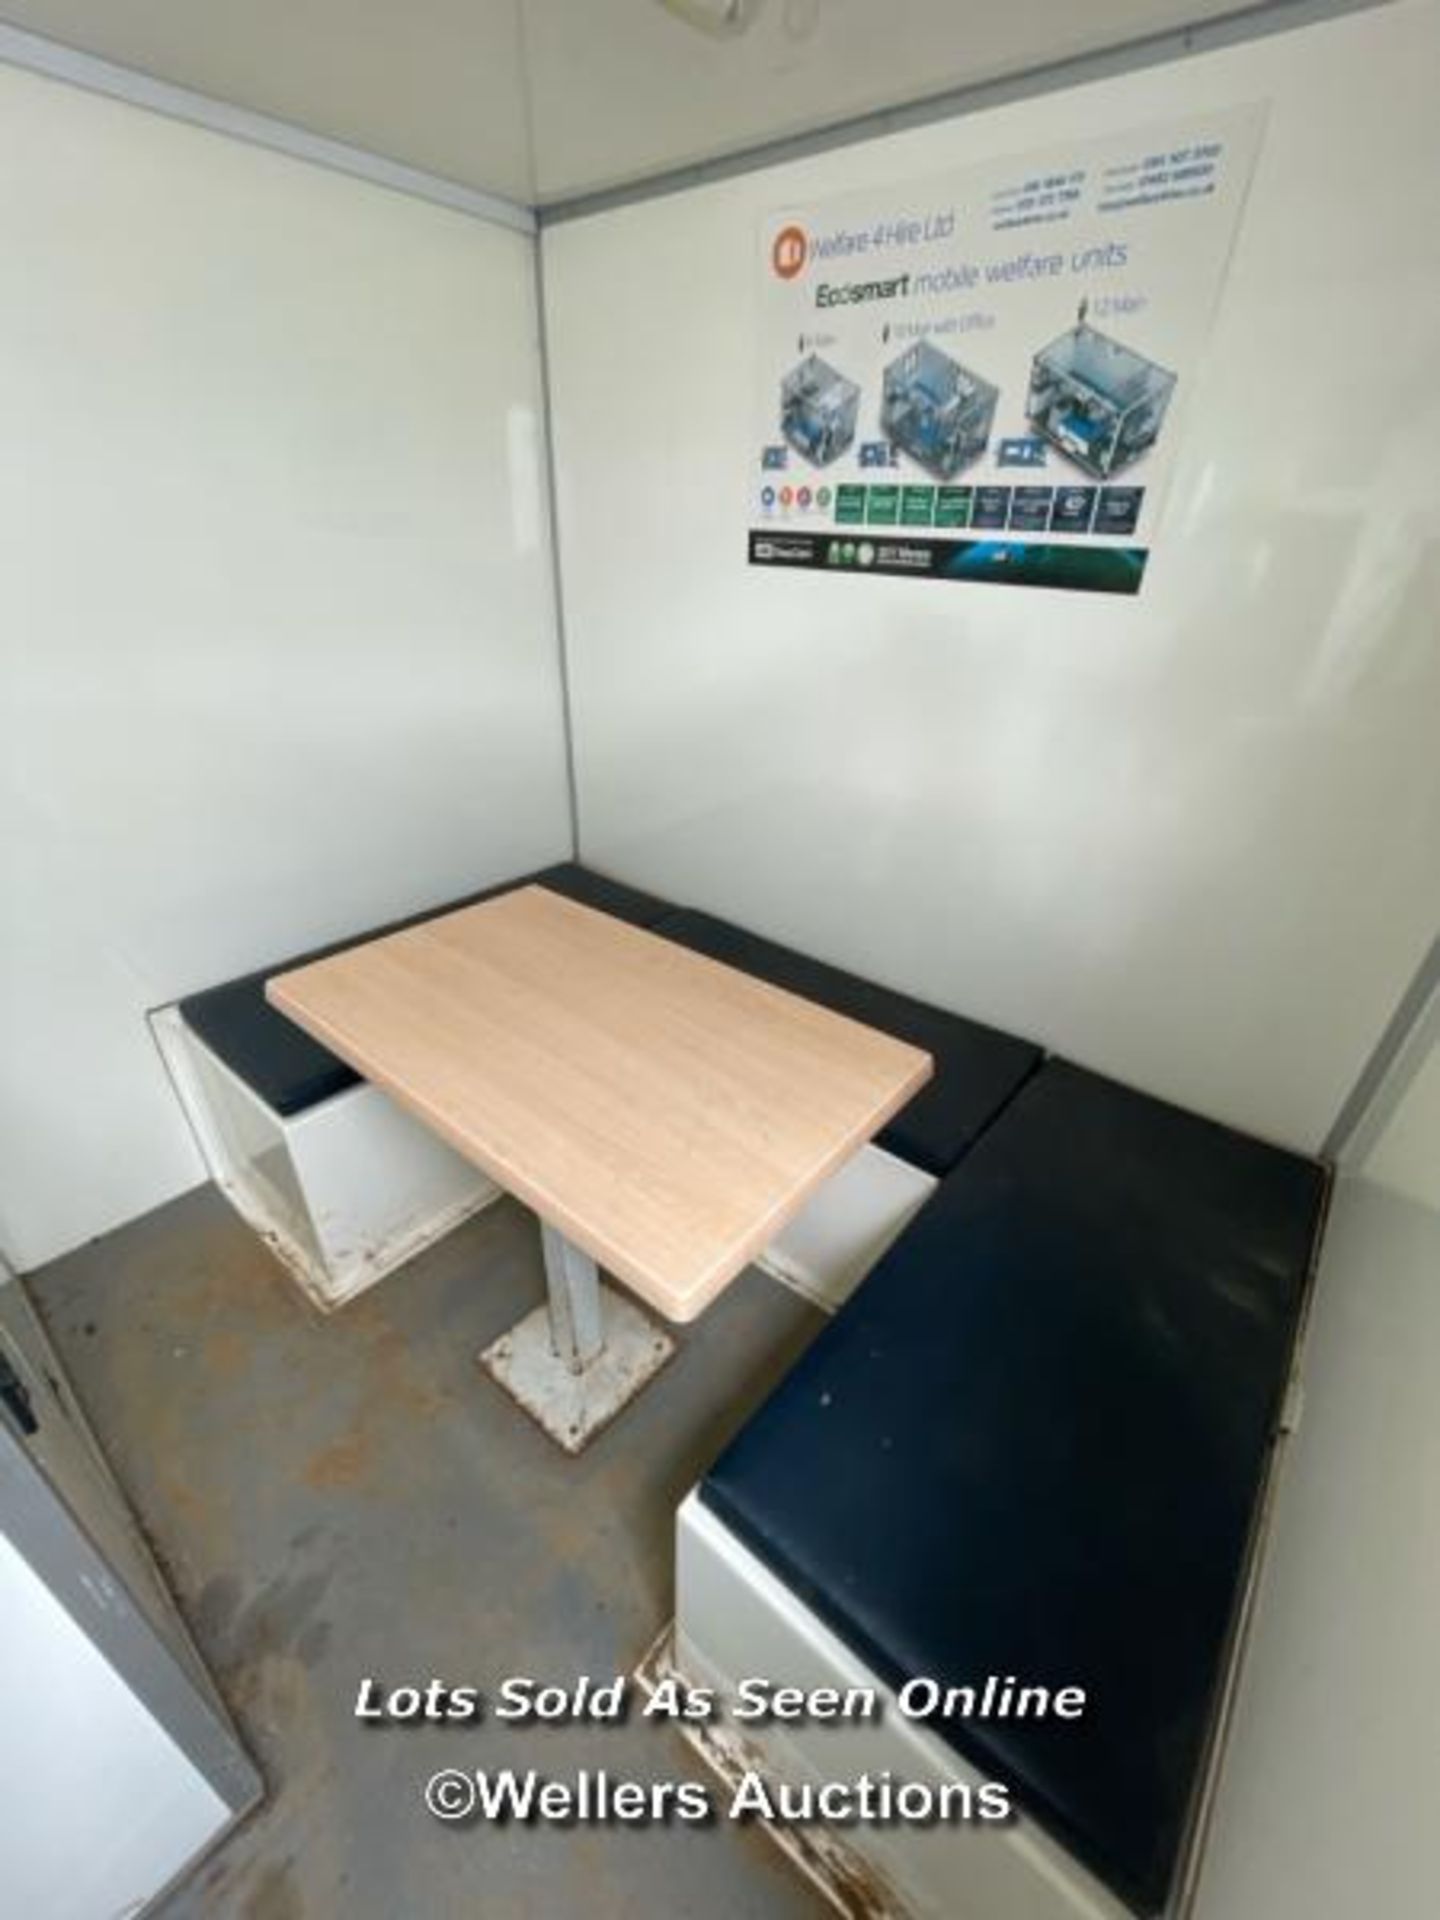 6 PERSON 12 X 7.5FT AJC EASY CABIN TOWABLE WELFARE UNIT, INCLUDES WASH BASIN, KETTLE, MICROWAVE, - Image 8 of 19